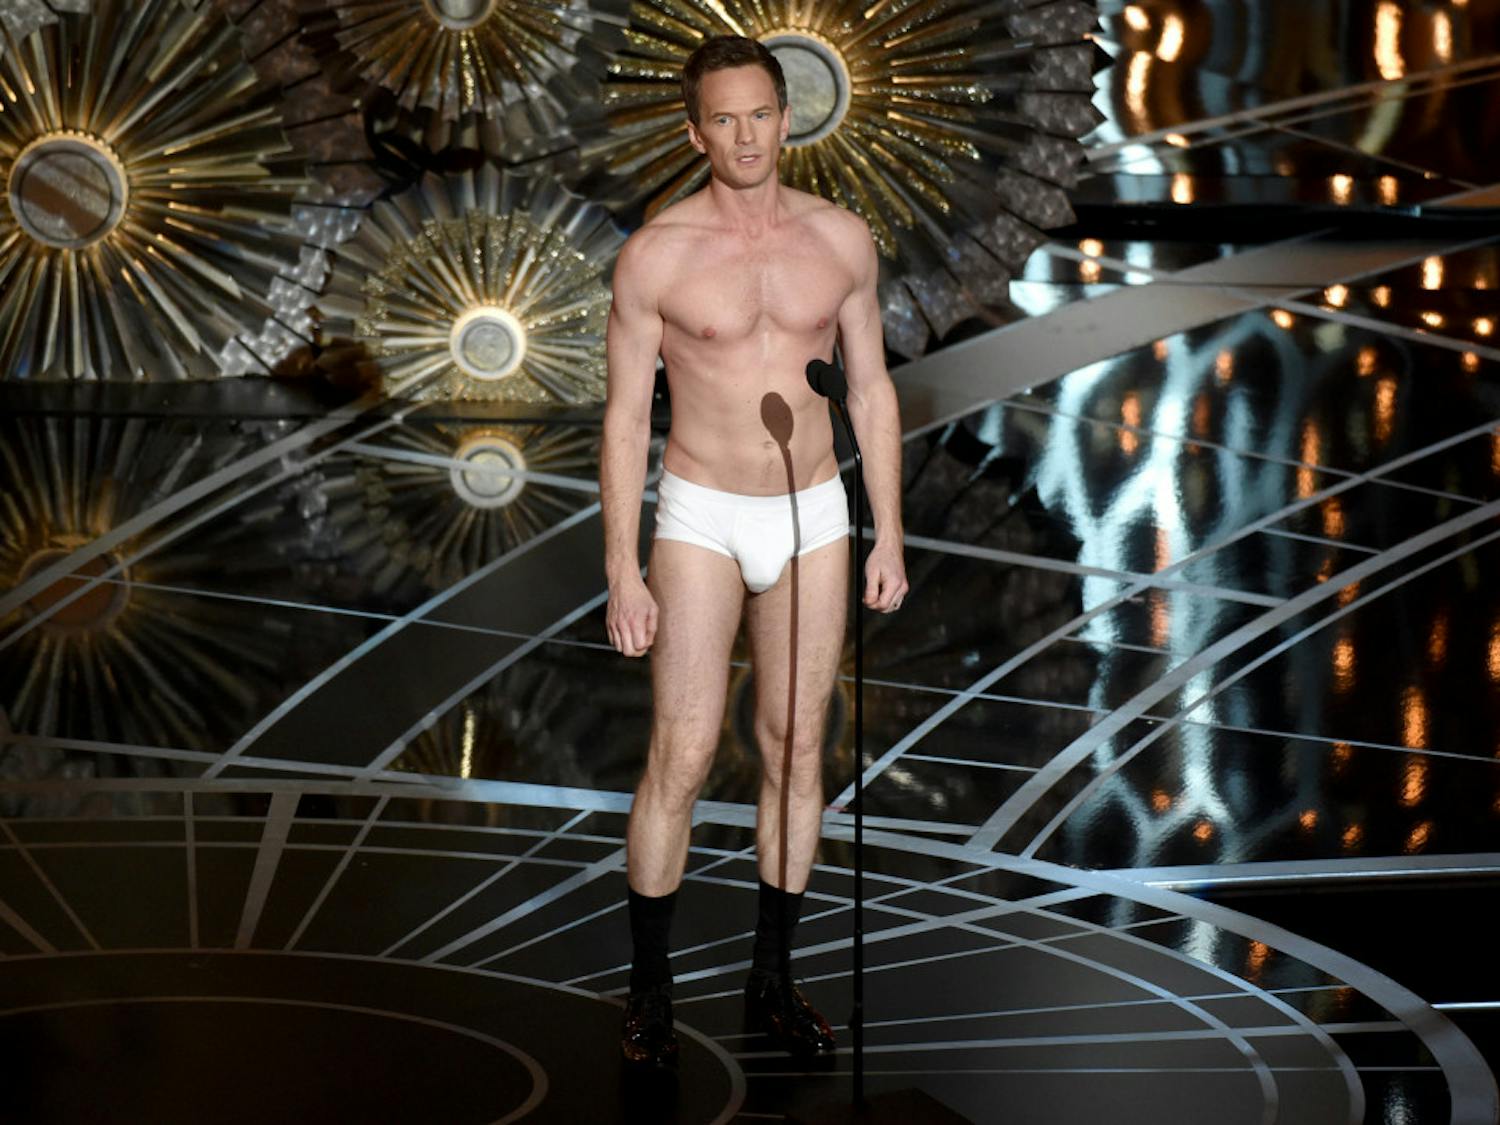 Host Neil Patrick Harris speaks at the Oscars on Sunday, Feb. 22, 2015, at the Dolby Theatre in Los Angeles. 